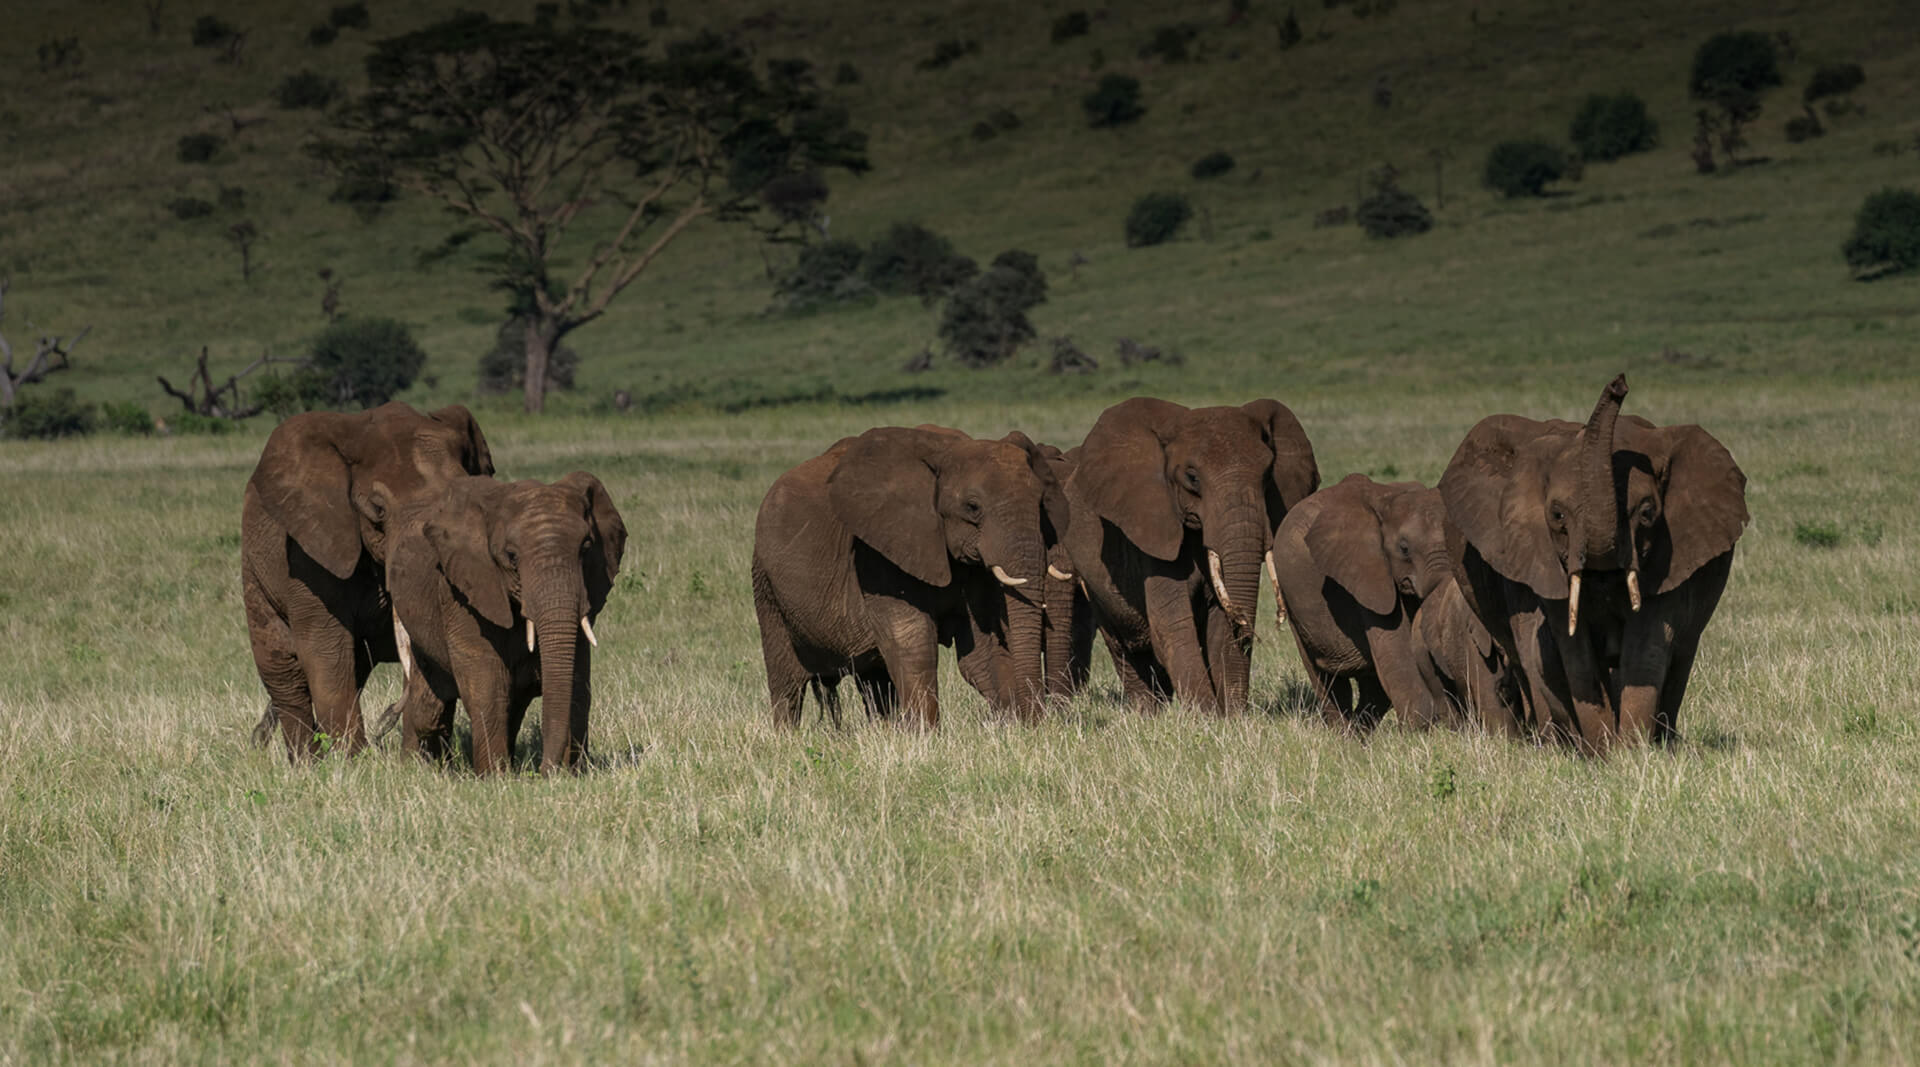 A group of elephants in the distance standing in a grass field. 